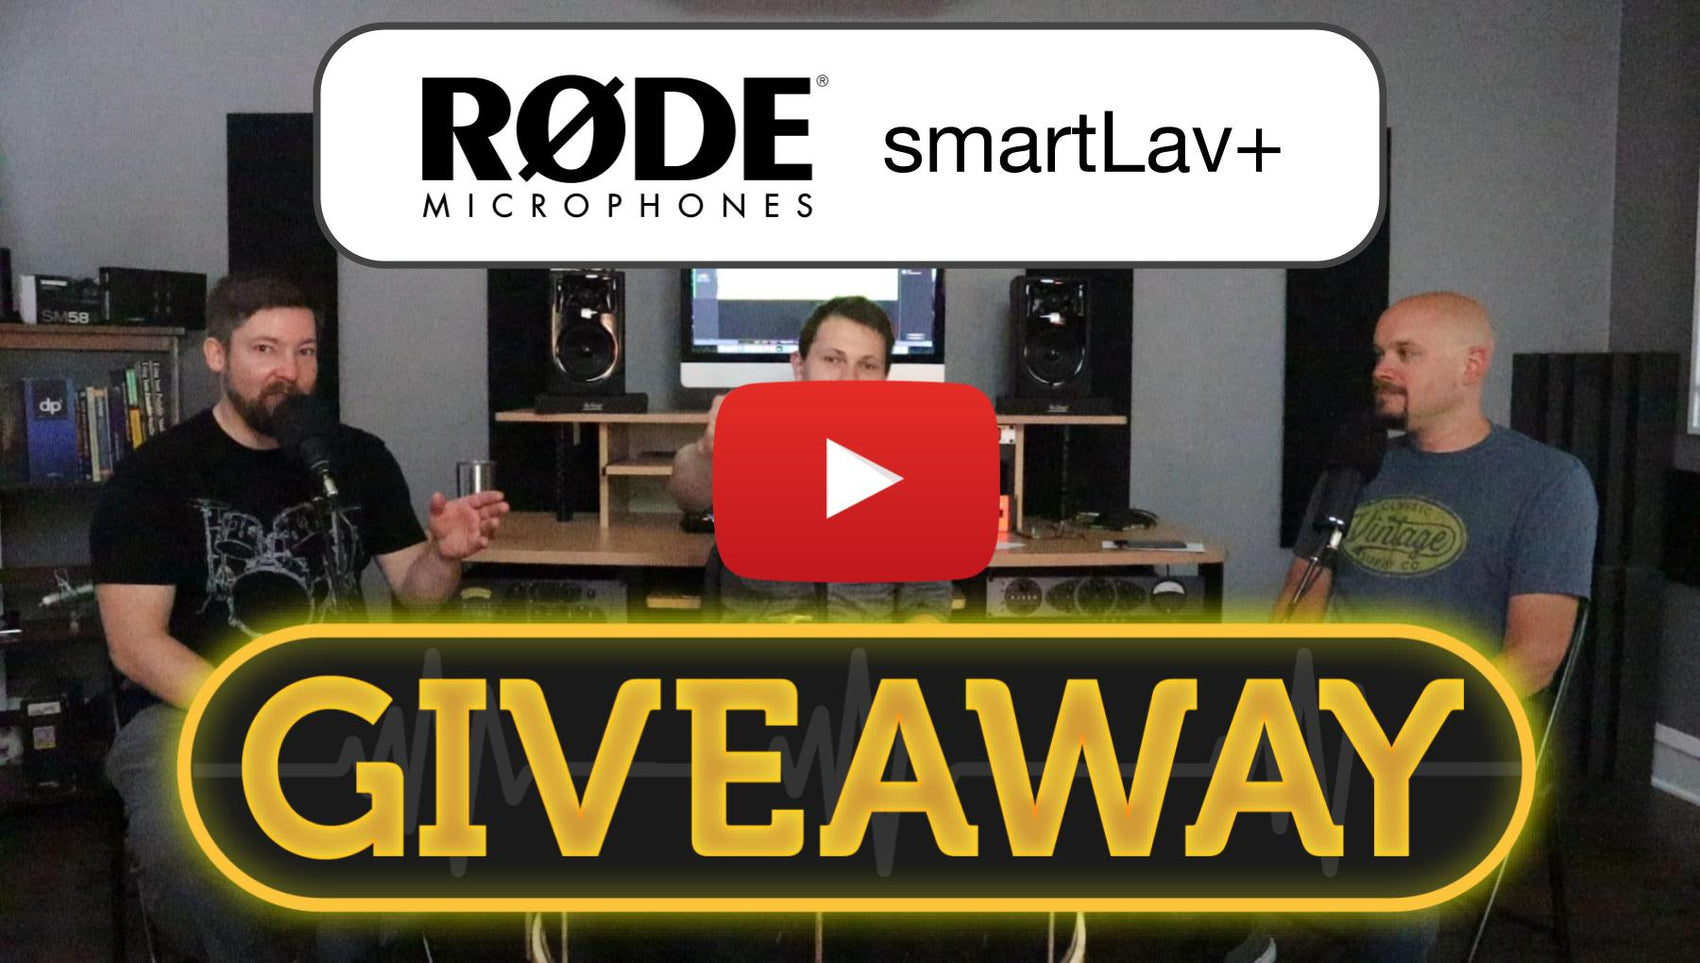 PPA Unfiltered - RODE SmarLav+ Giveaway!